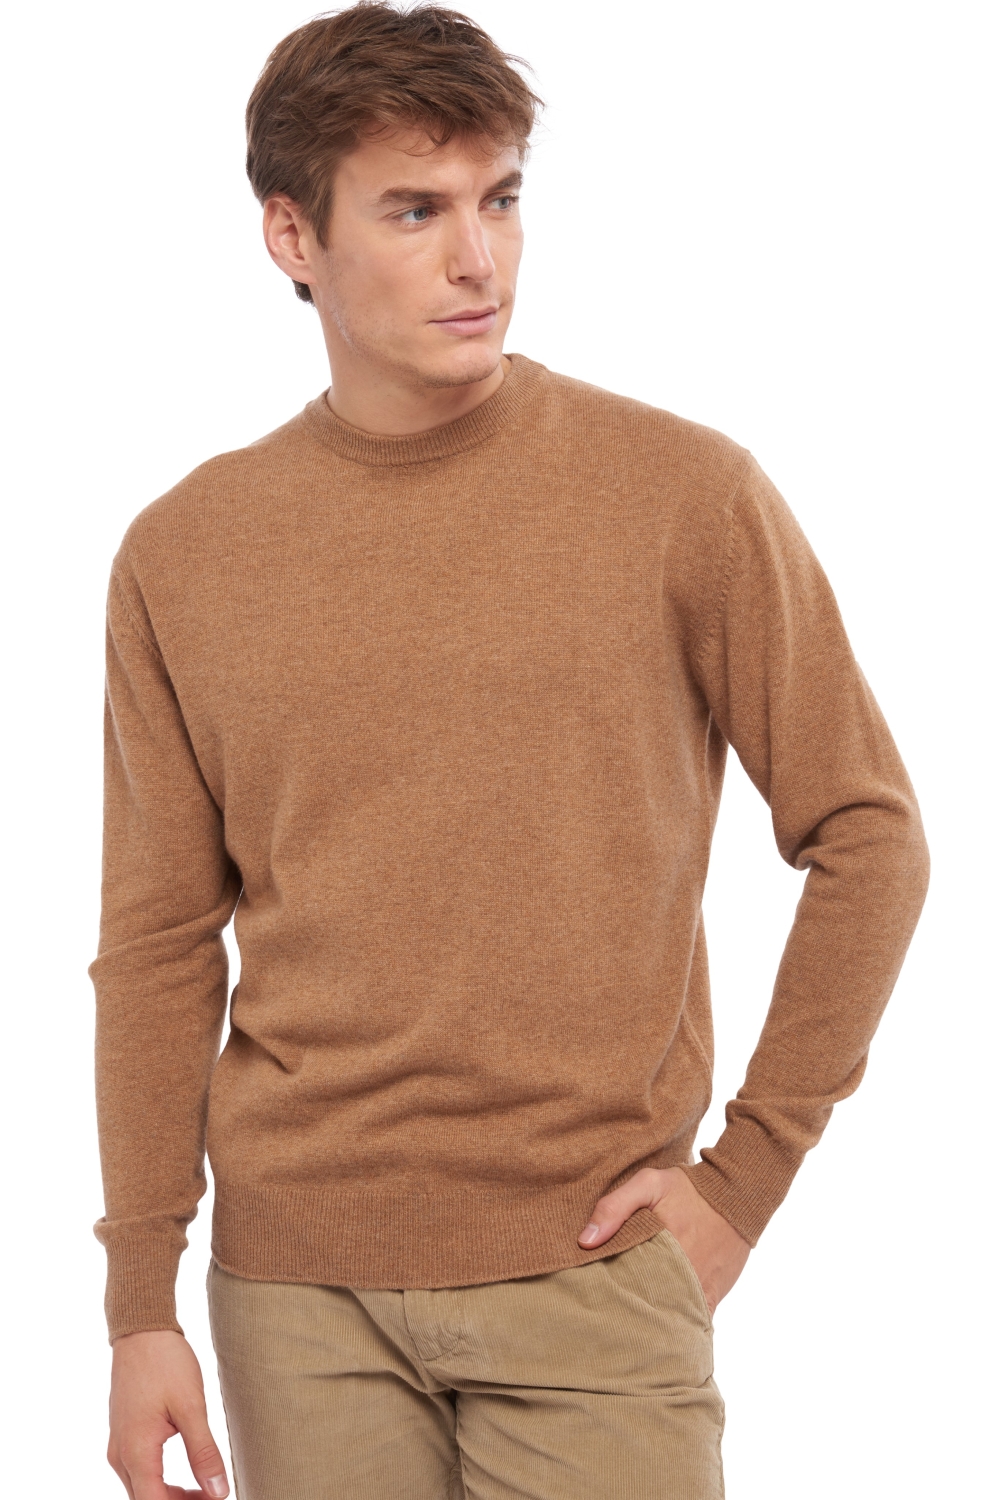 Cachemire pull homme col rond nestor camel chine xs